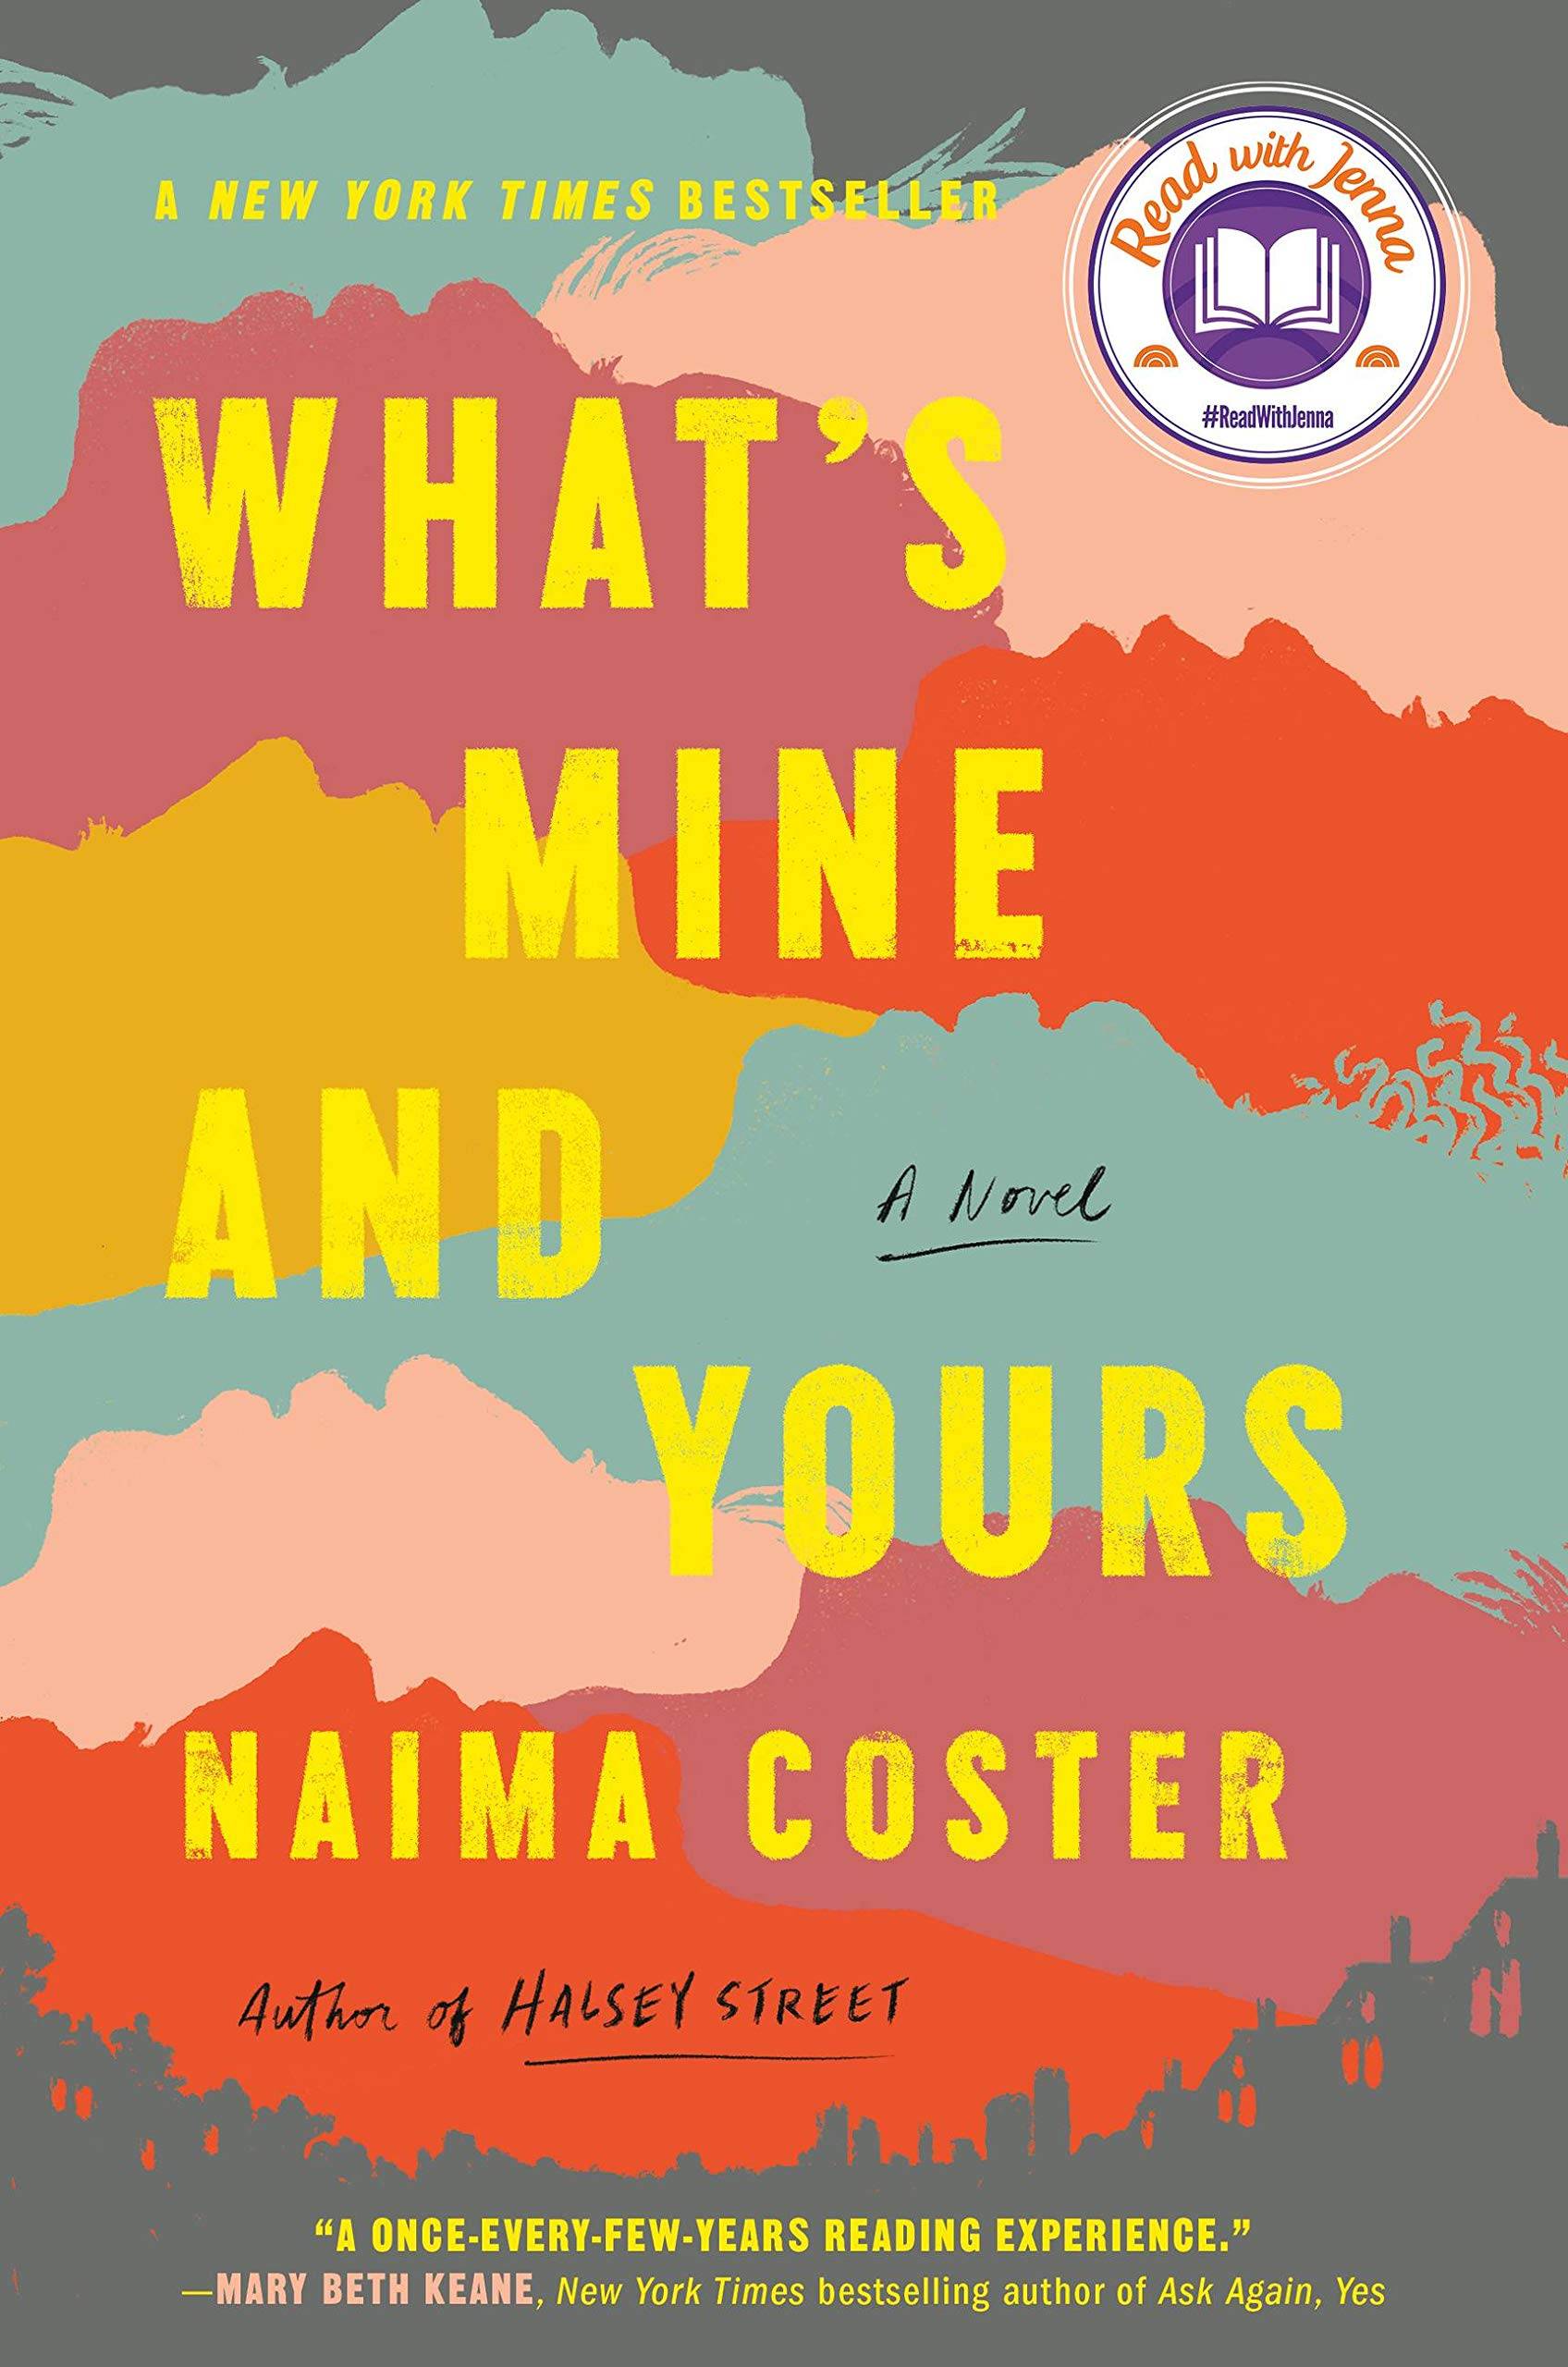 "what's mine and yours" cover featuring an abstract multi-colored hilly landscape.